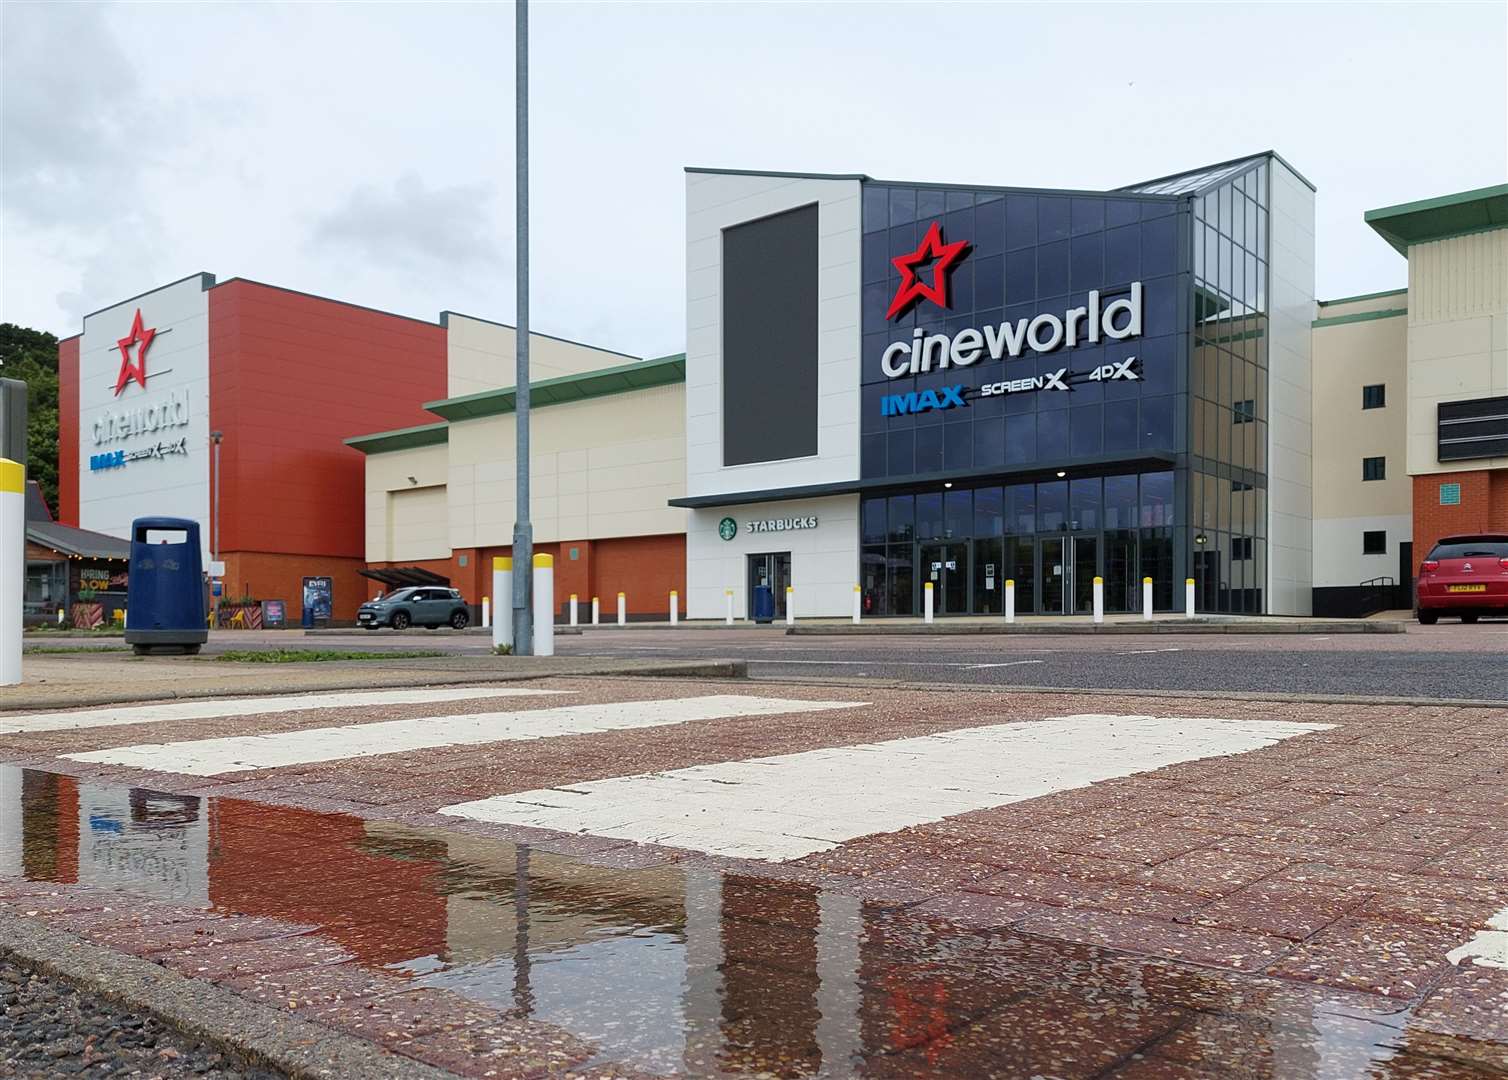 Cineworld is expected to exit bankruptcy in July